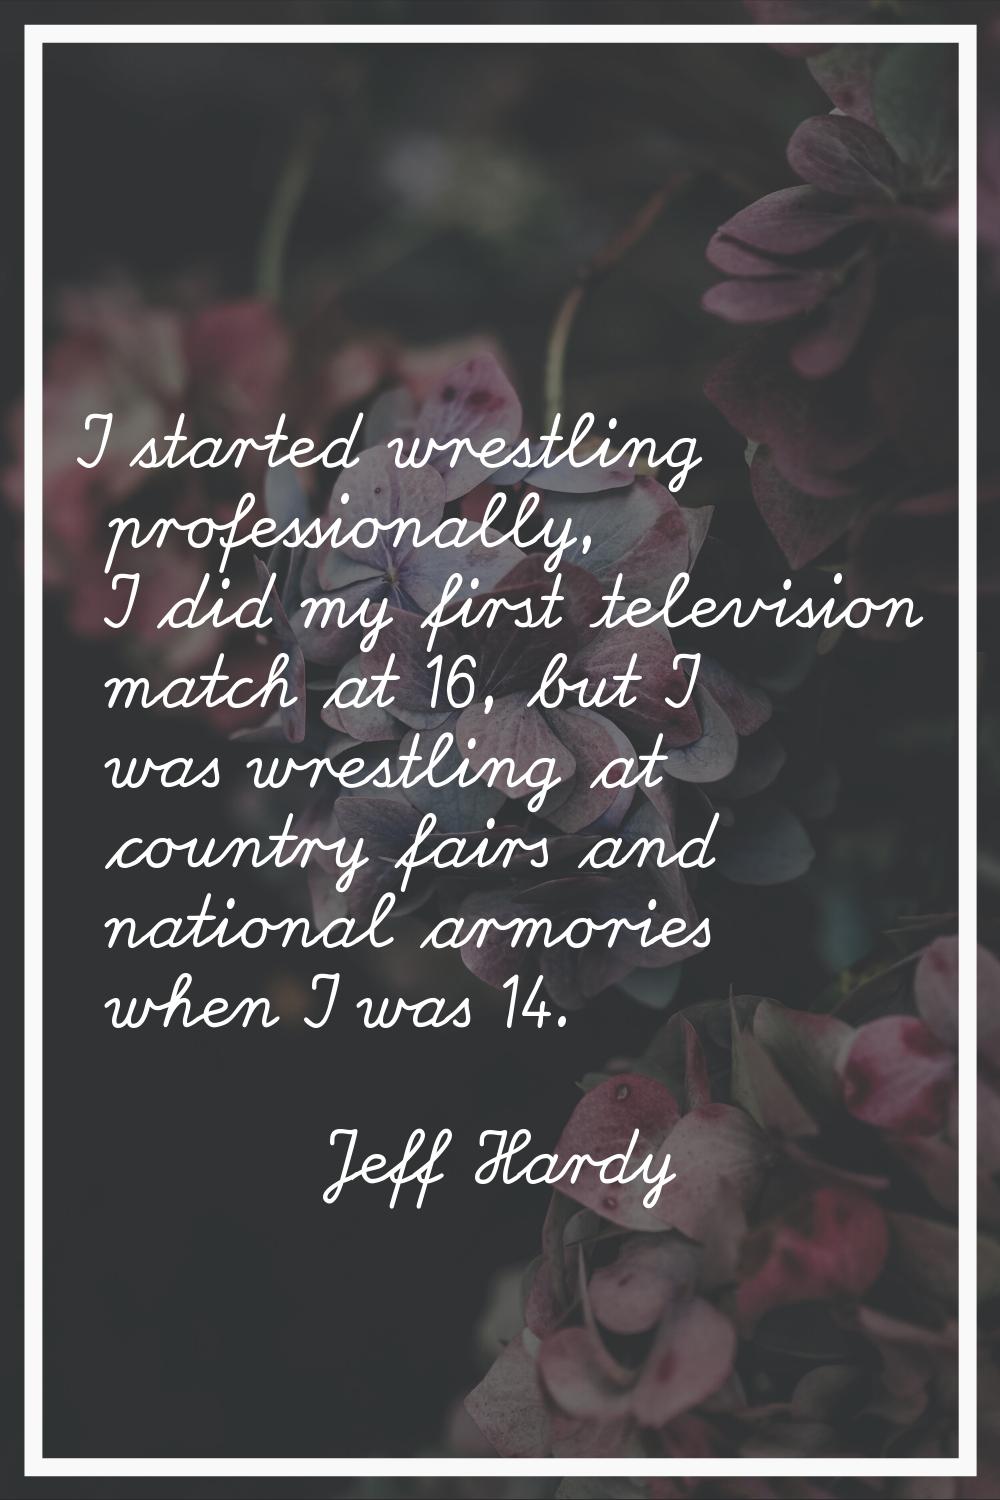 I started wrestling professionally, I did my first television match at 16, but I was wrestling at c